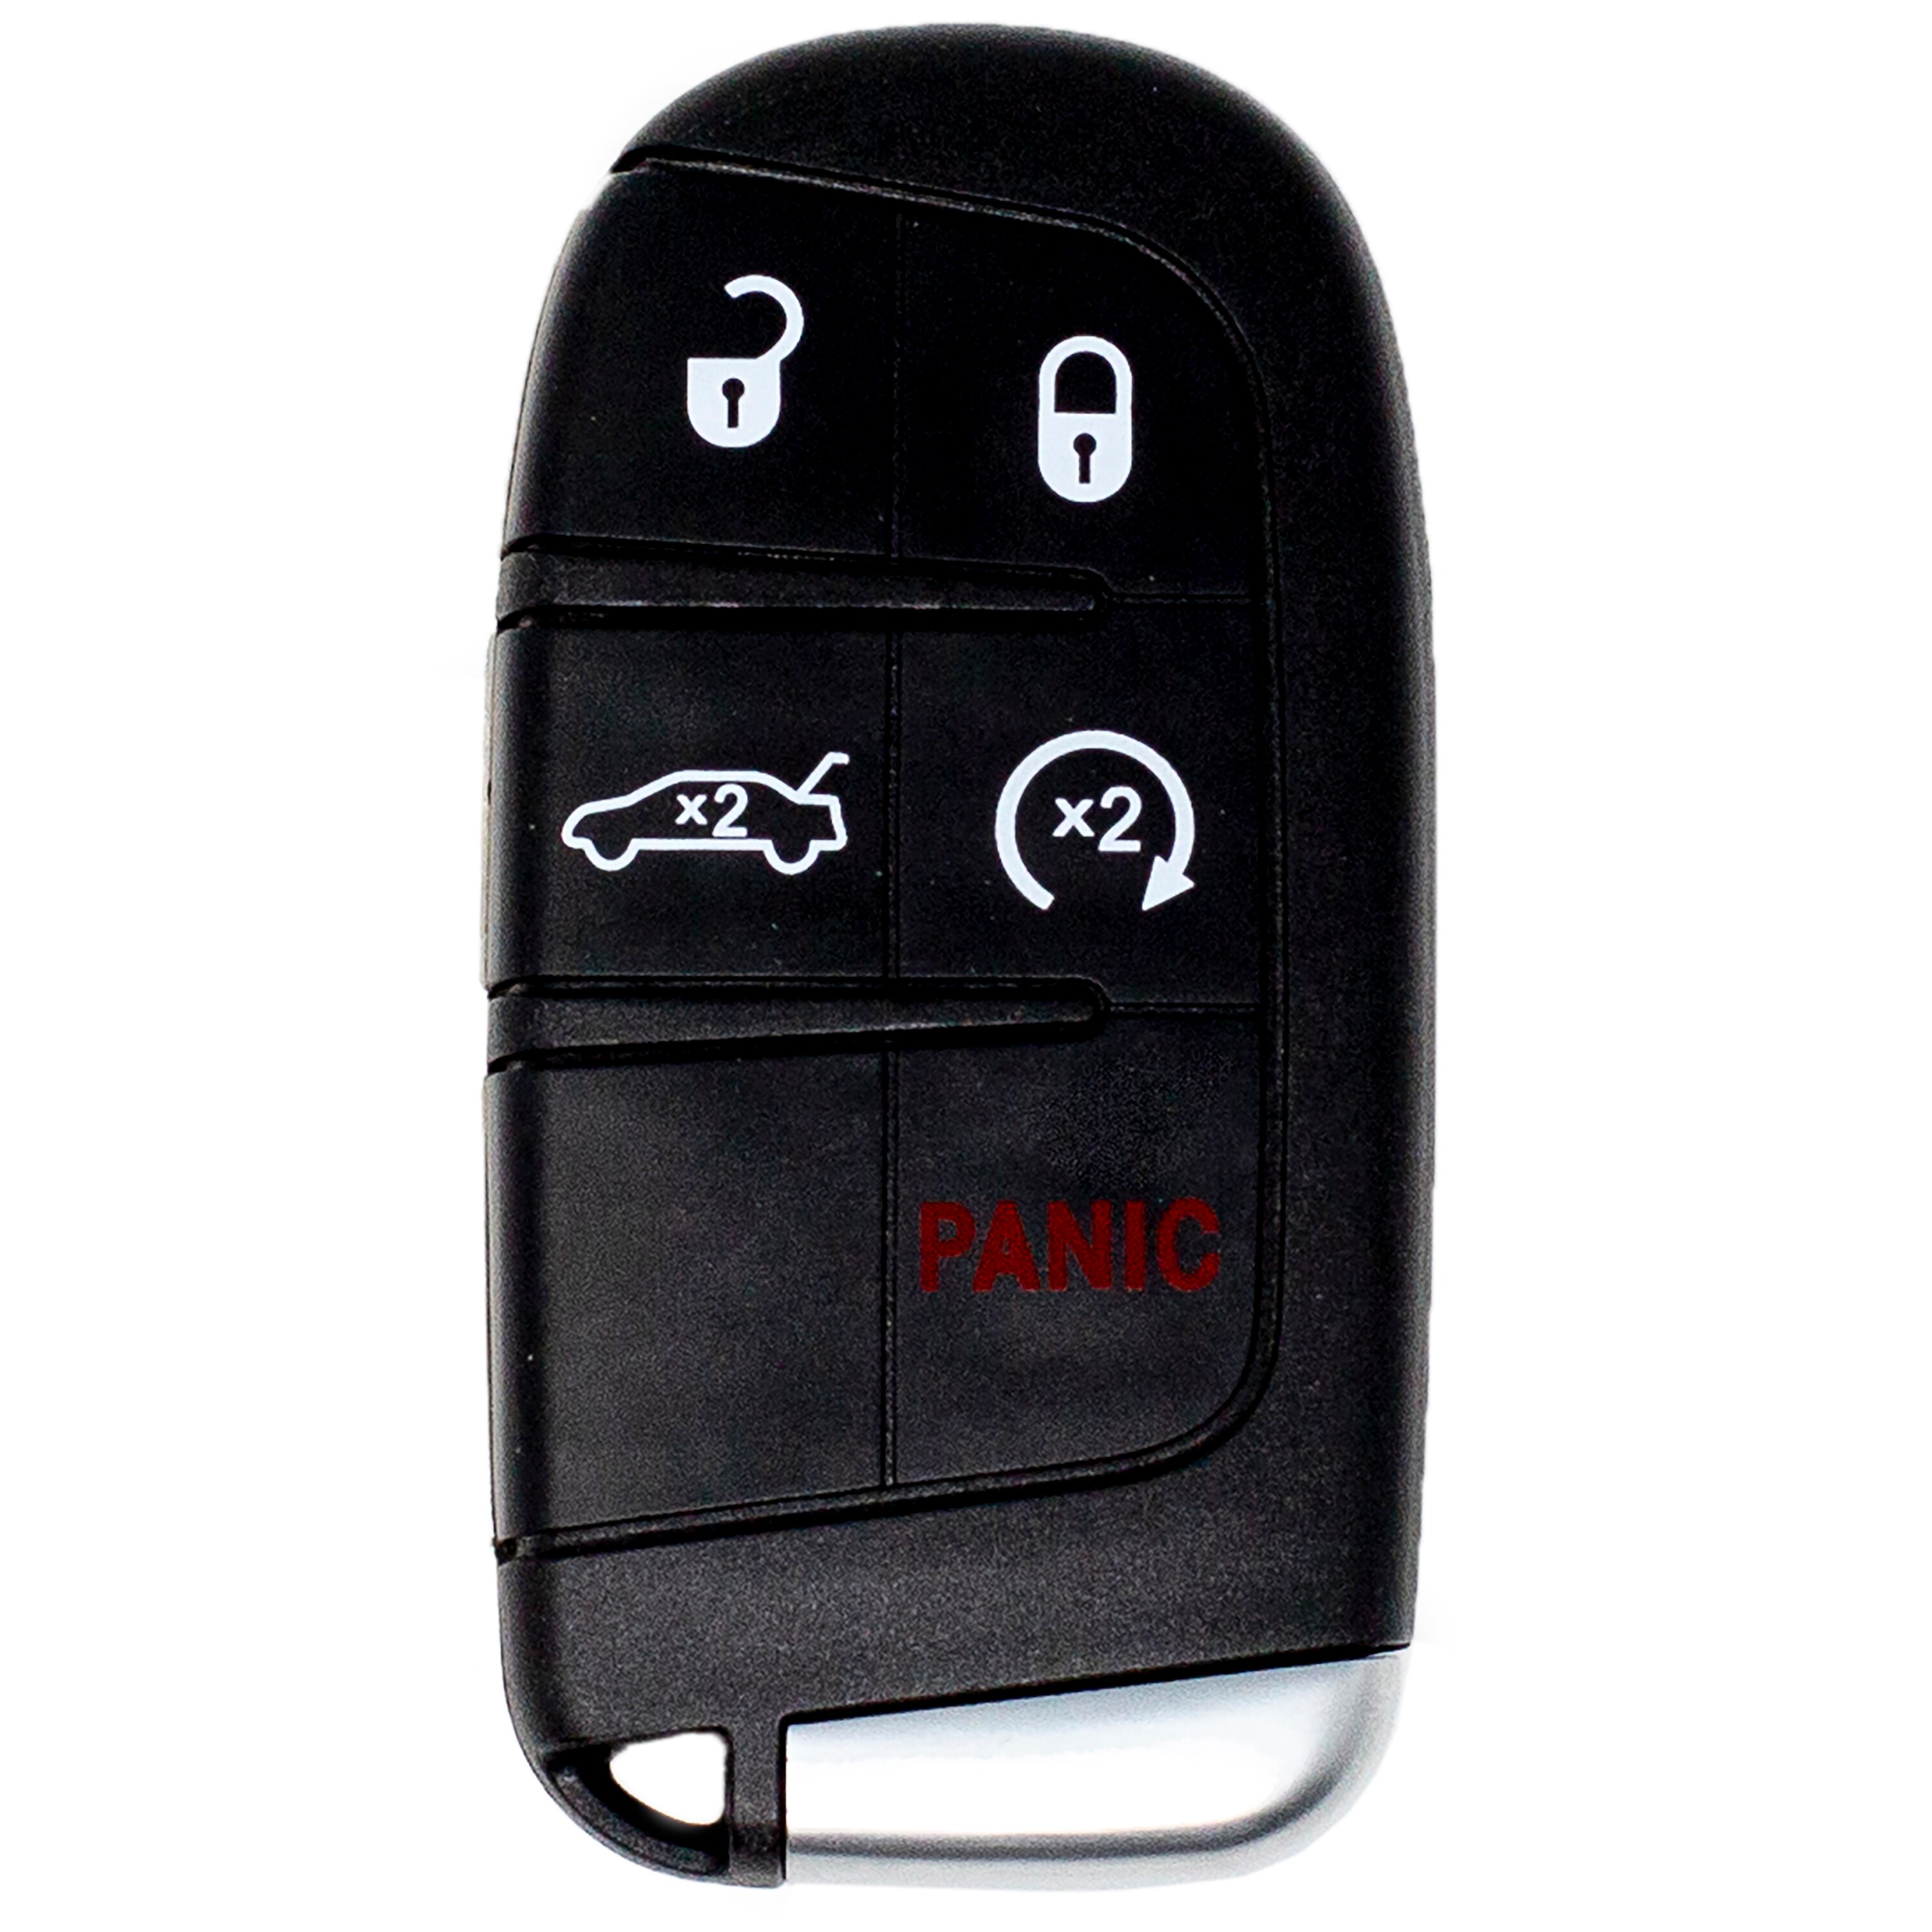 Remote Key Case Button Pad fit for CHRYSLER DODGE JEEP Replacement Pad Fob 4 B 